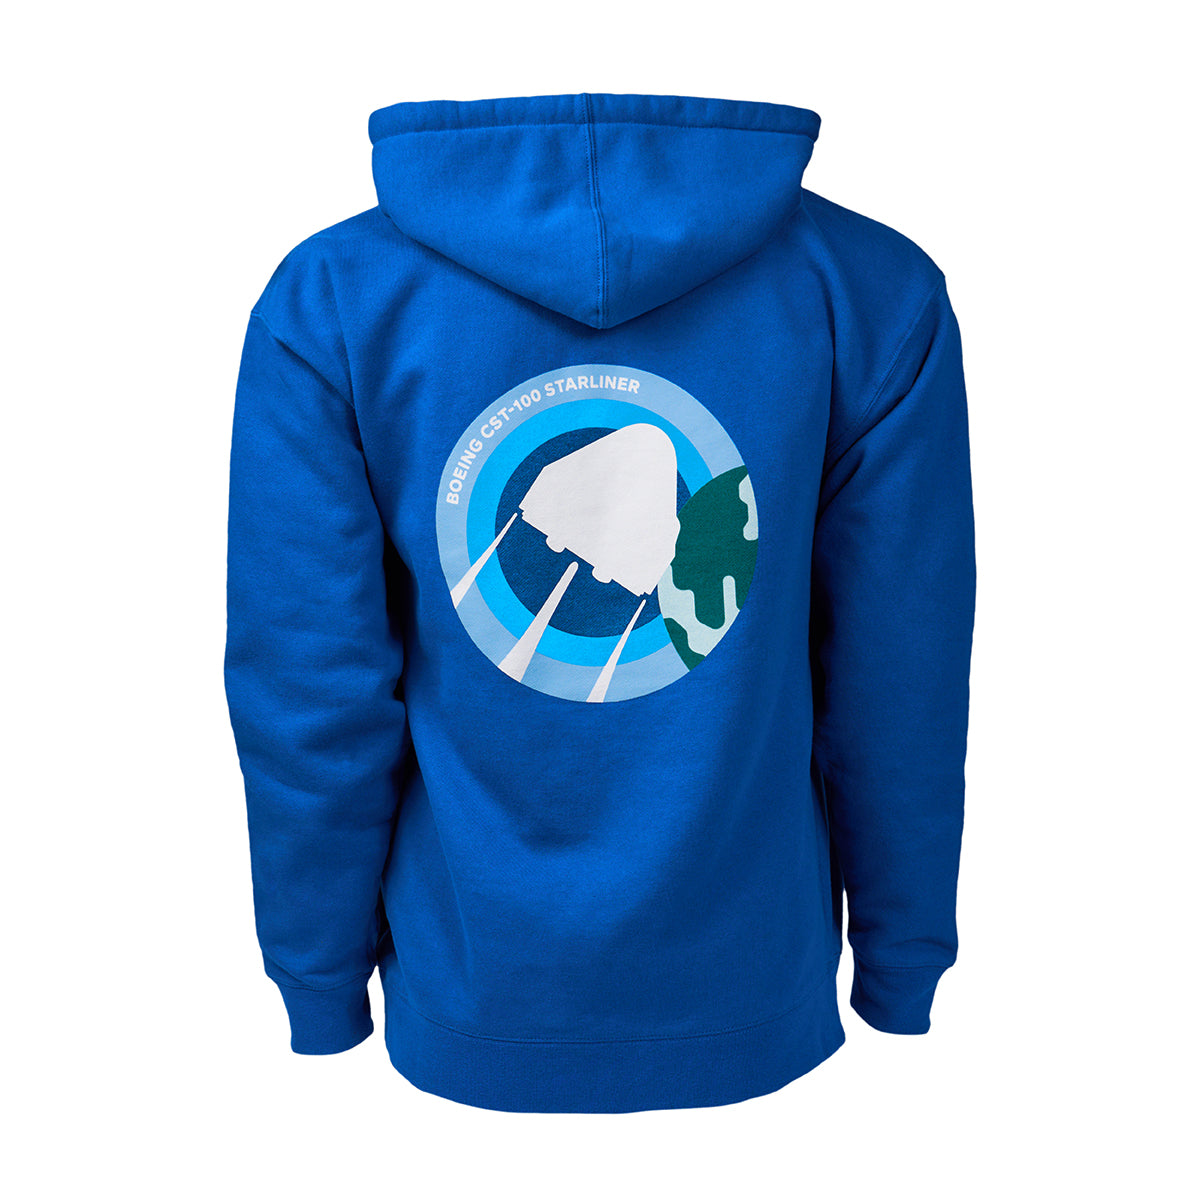 Full product image of the back side of the hooded sweatshirt in a royal blue color.  Showing the Skyward graphic of the Boeing CST-100 Starliner